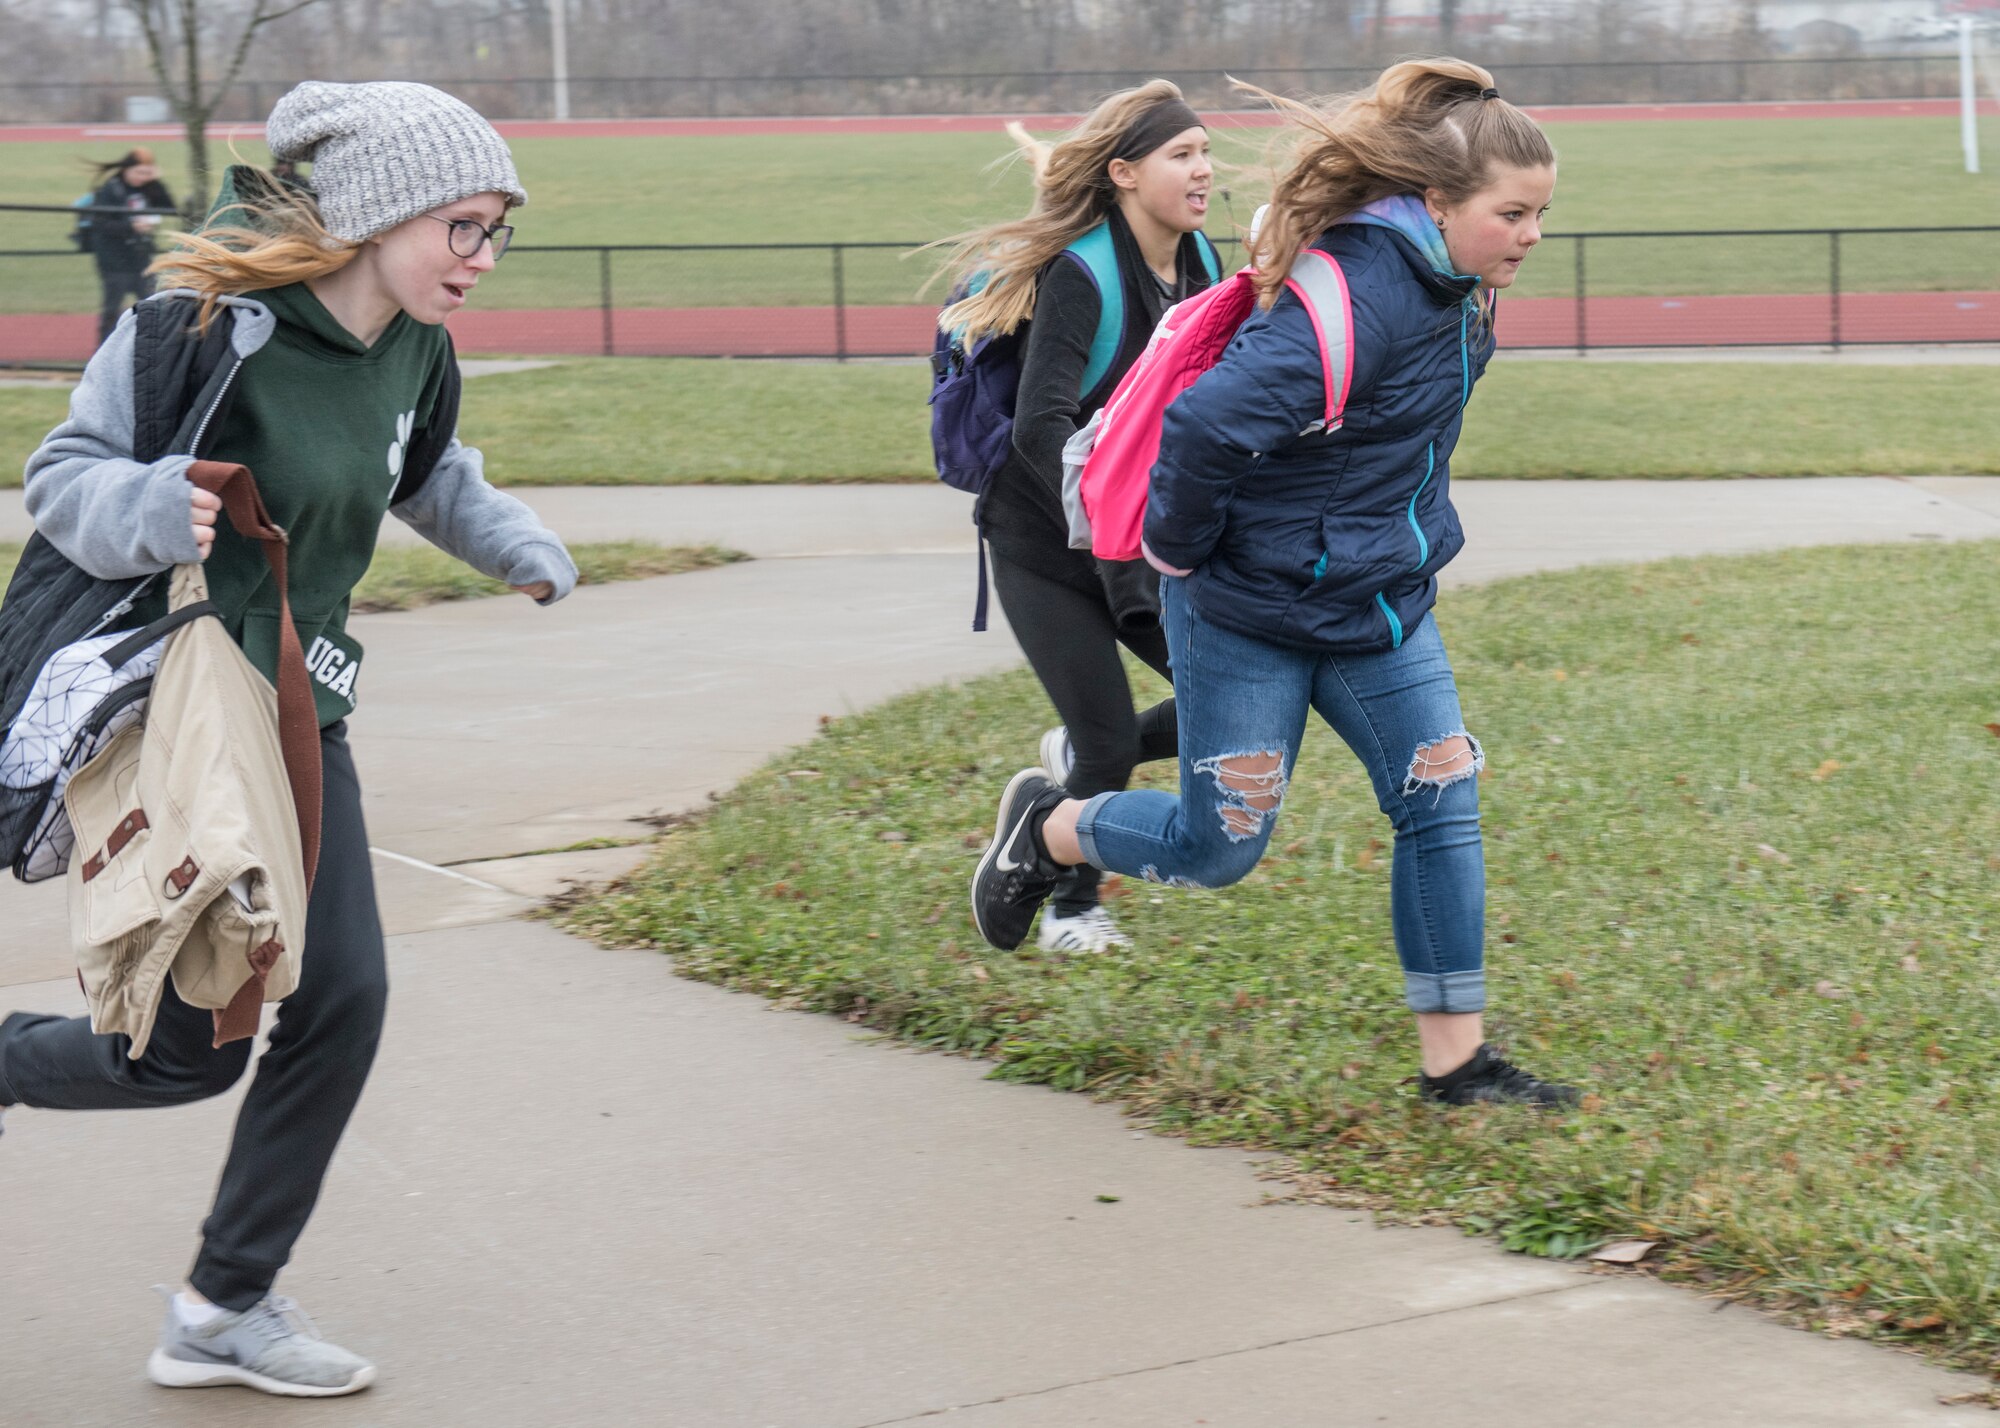 Abby Carlton, Savannah Hoffman, and Allyssa Owen, Smithton Middle School eighth graders, rush to the school bus to retrieve the recently launched high-altitude computer after their year-long science, technology, engineering, and mathematics project made possible through an Air Force STEM grant, Nov. 30, 2018, Belleville, Illinois. Three schools, Emge Junior High School, Smithton Middle School and Belle Valley School, worked together to launch a balloon that carried a high-altitude computer, which analyzed data ranging from altitude and coordinates traveled to temperature and pressure. The students found the popped balloon 140 miles away in Mount Carmel, Illinois.